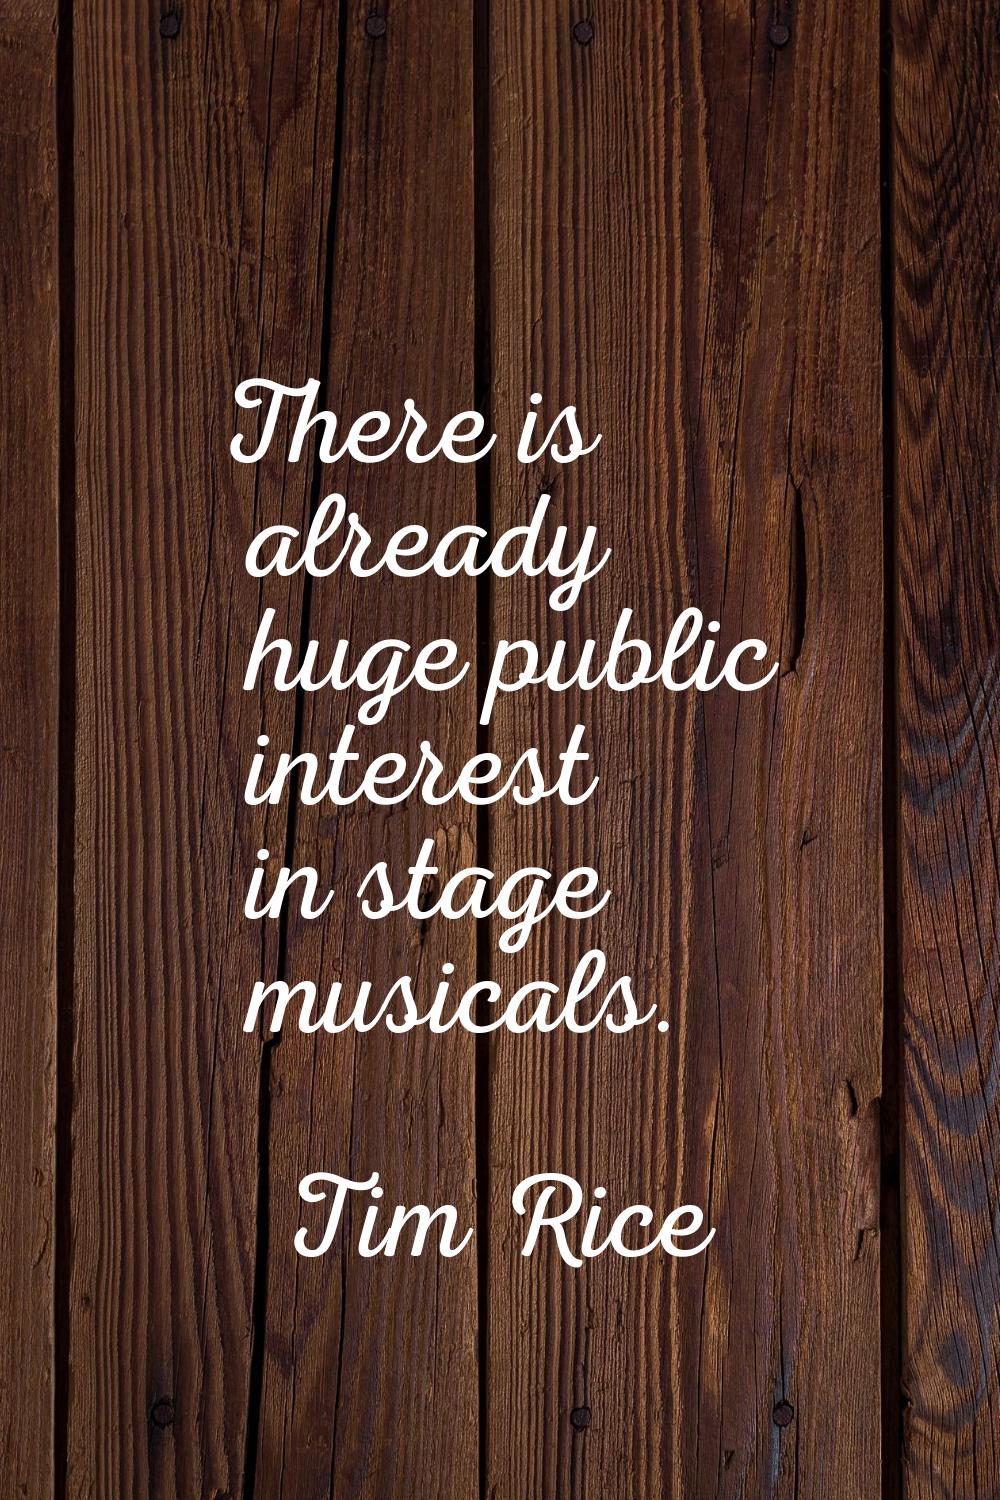 There is already huge public interest in stage musicals.